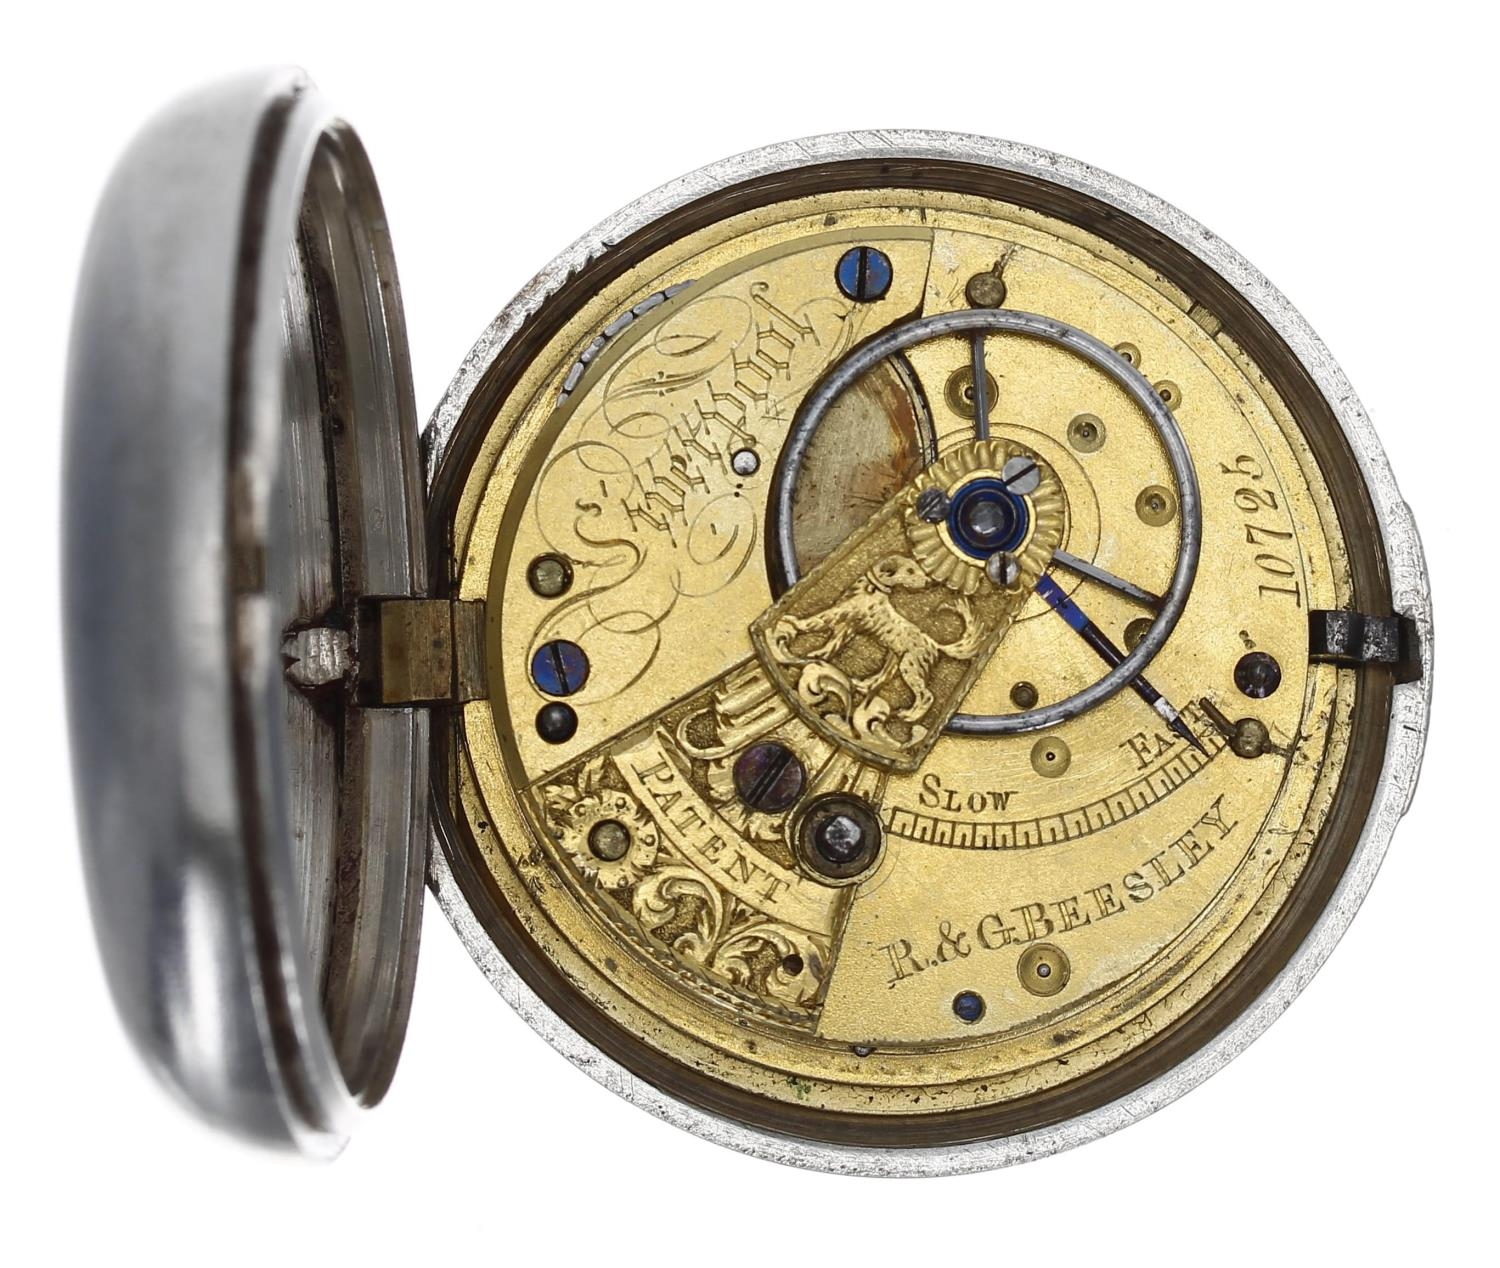 R&G Beesley, Liverpool - Victorian silver fusee lever pocket watch, Birmingham 1894, signed - Image 3 of 6